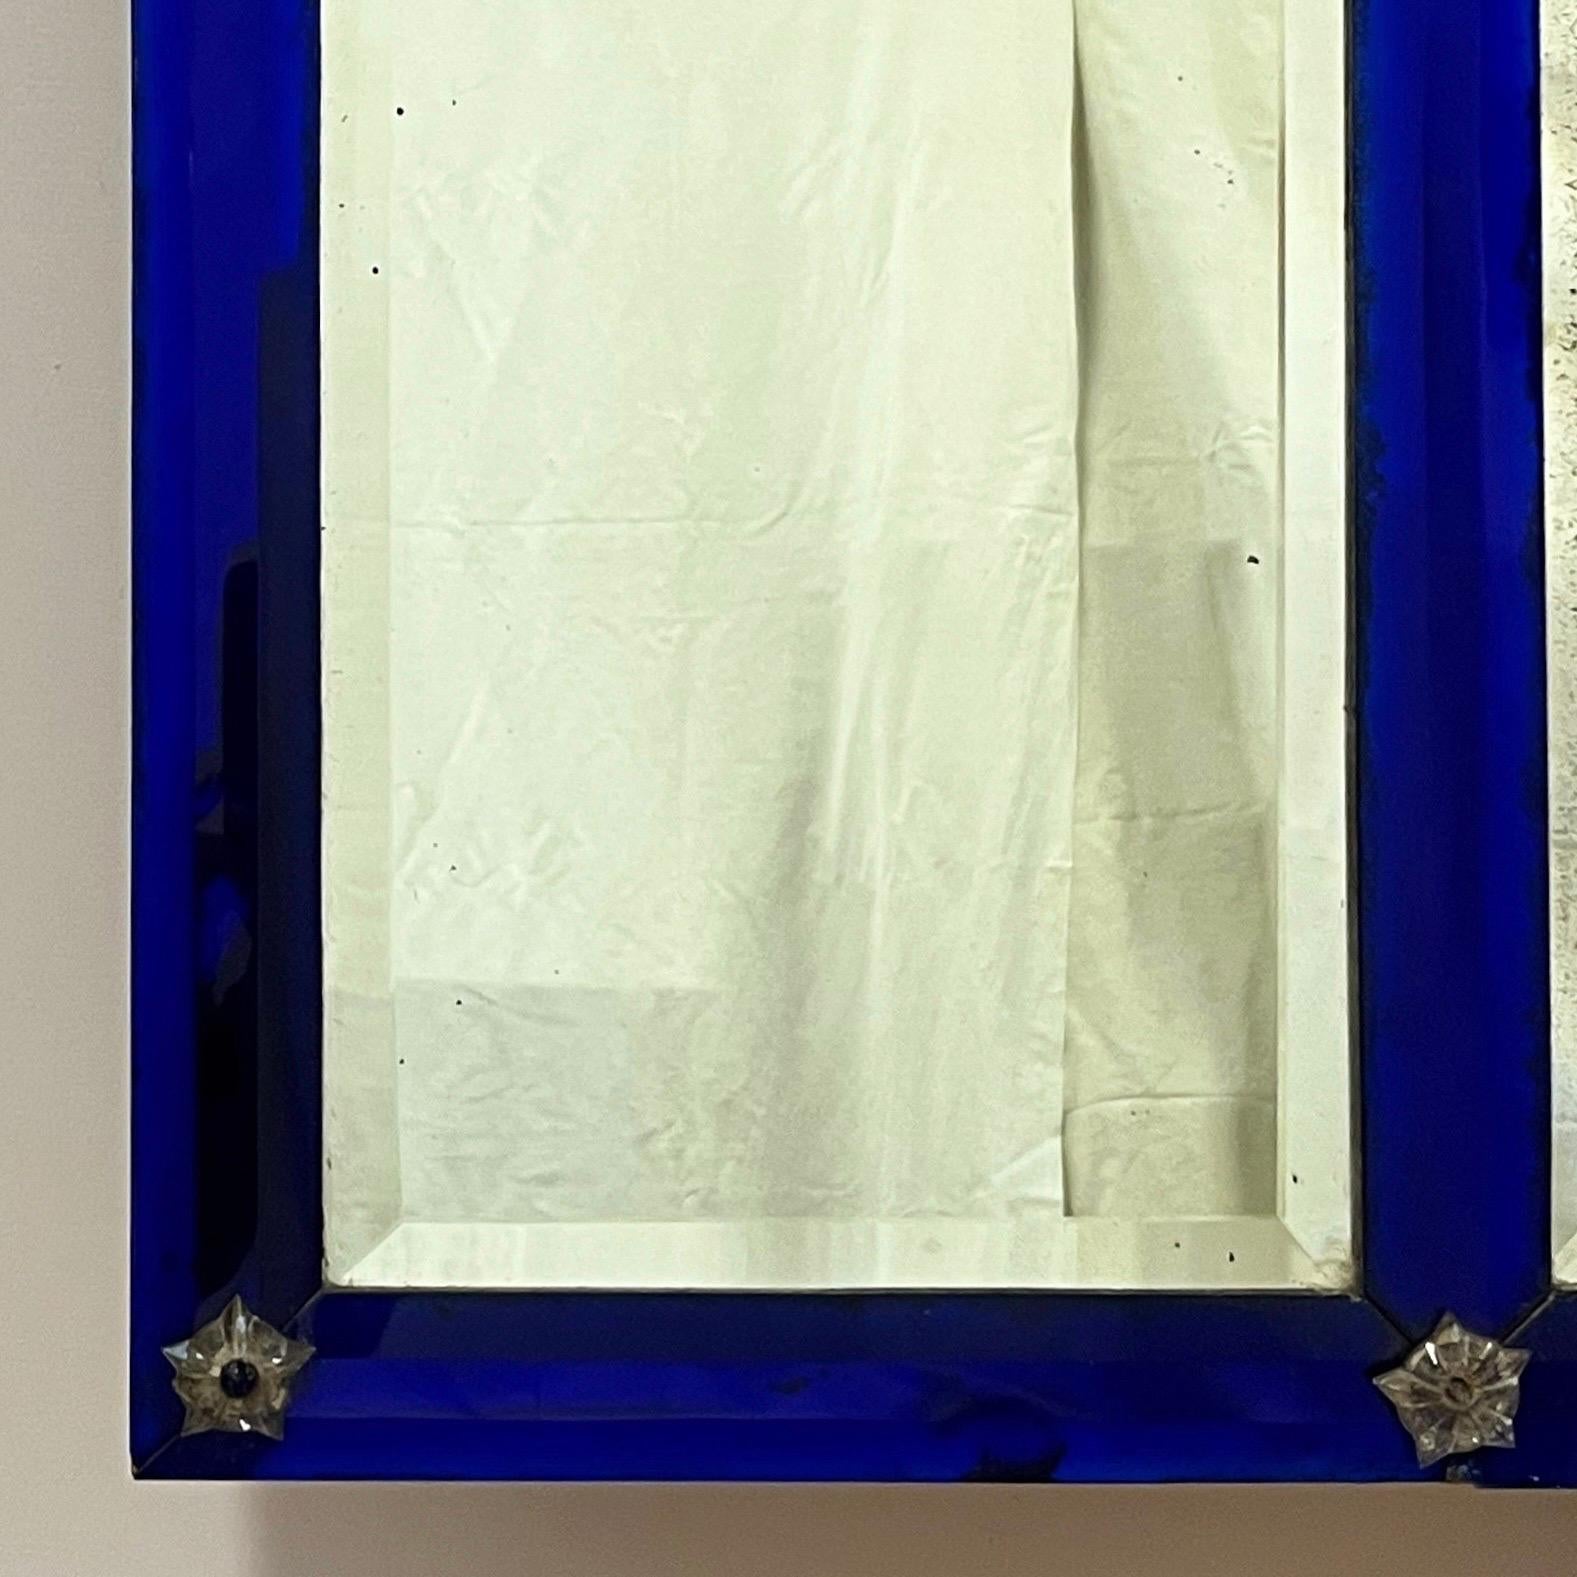 A very elegant French overmantel mirror with central arched section flanked by two rectangular plates and with empire blue glass border, all bevelled - interspersed with glass star paterae.

Early Twentieth Century